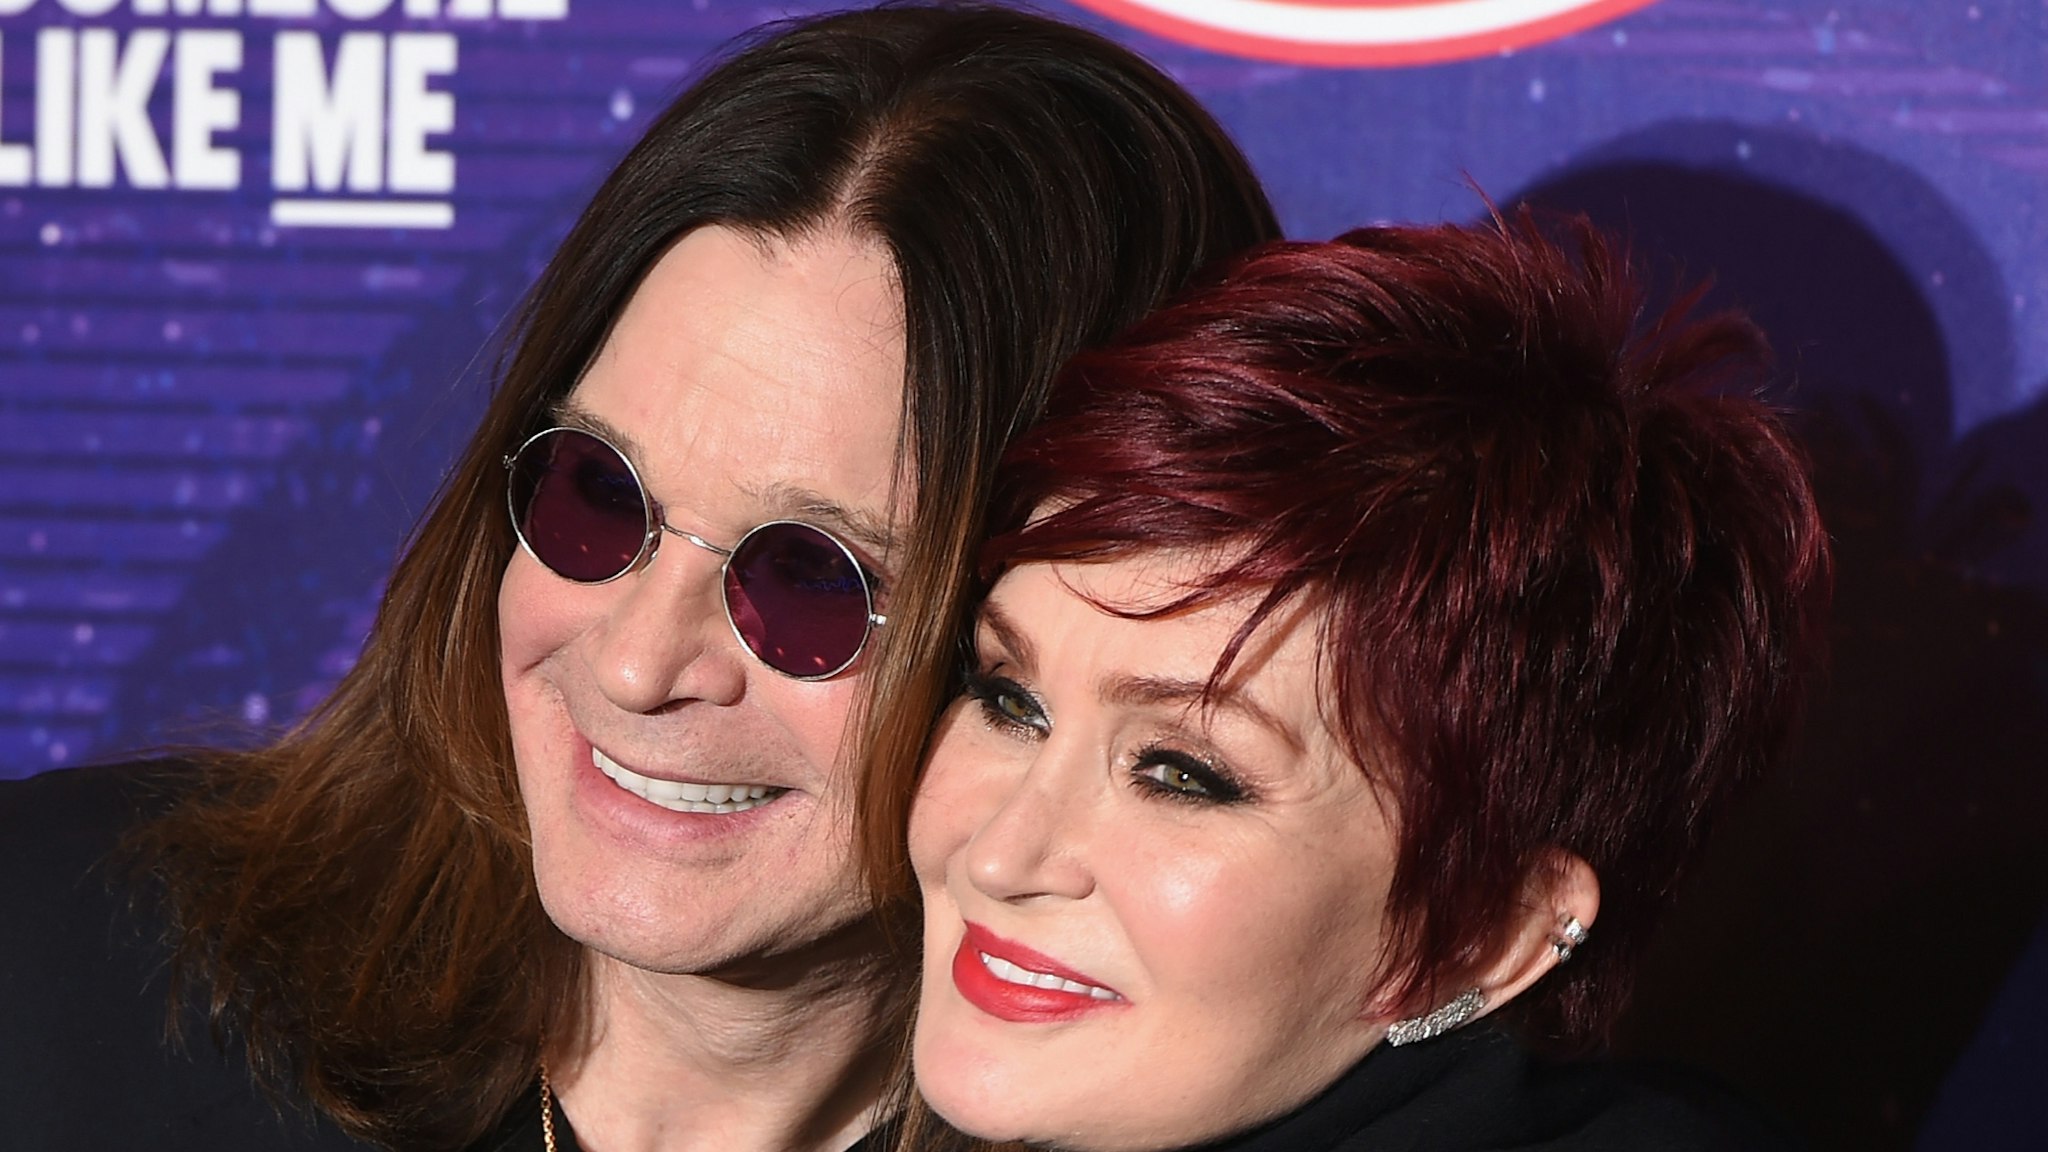 Ozzy Osbourne and Sharon Osbourne attend the MTV EMA's 2014 at The Hydro on November 9, 2014 in Glasgow, Scotland.